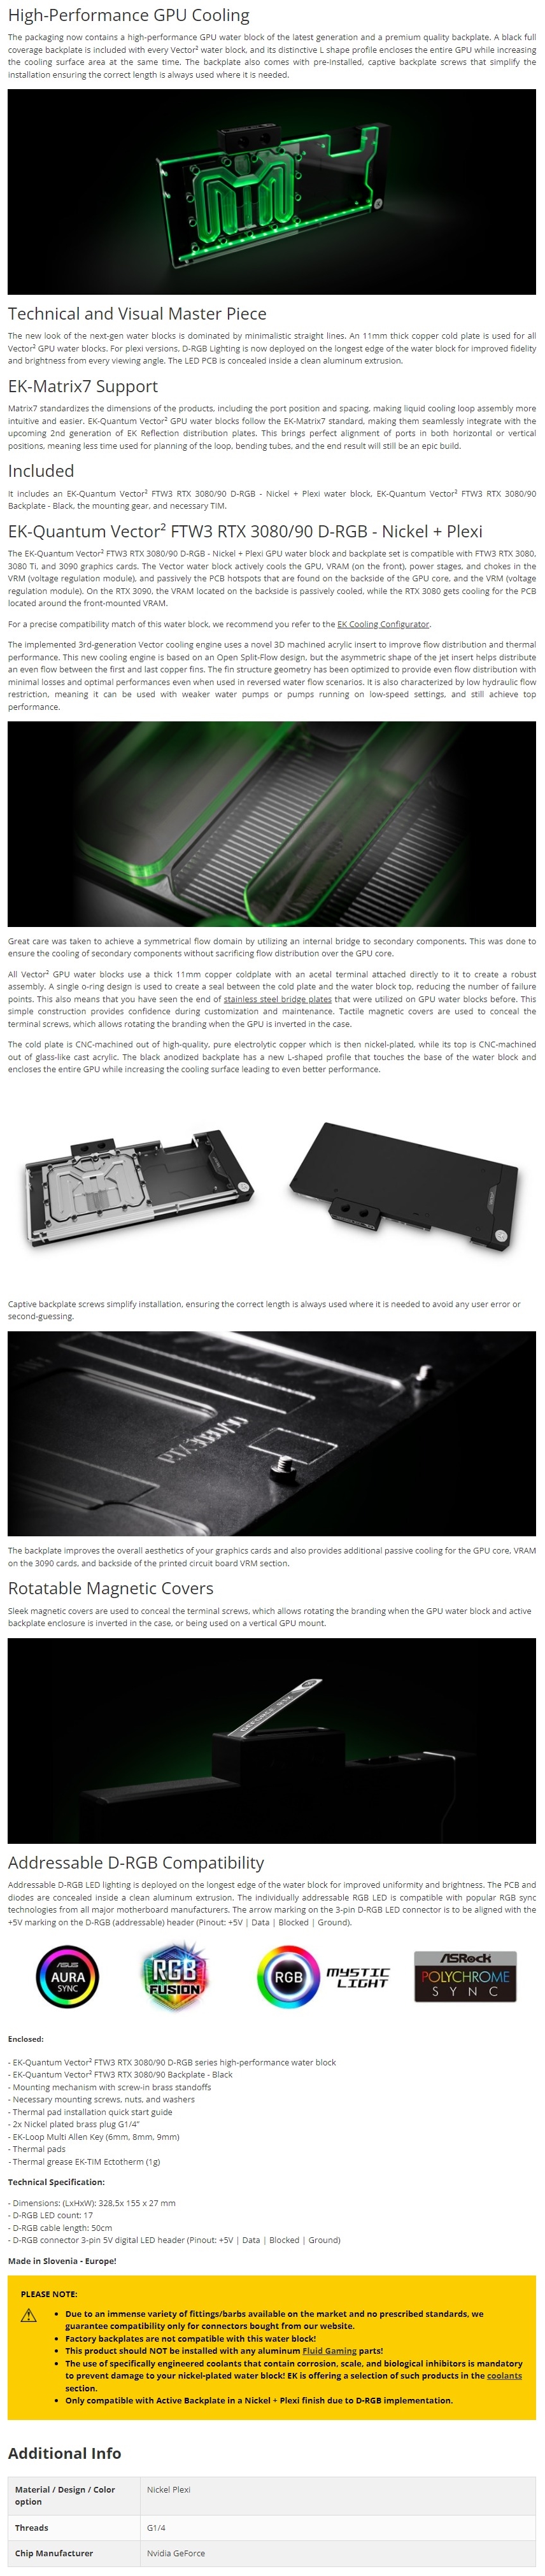 A large marketing image providing additional information about the product EK Quantum Vector² FTW3 RTX 3080/3090 D-RGB GPU Waterblock - Nickel/Plexi - Additional alt info not provided